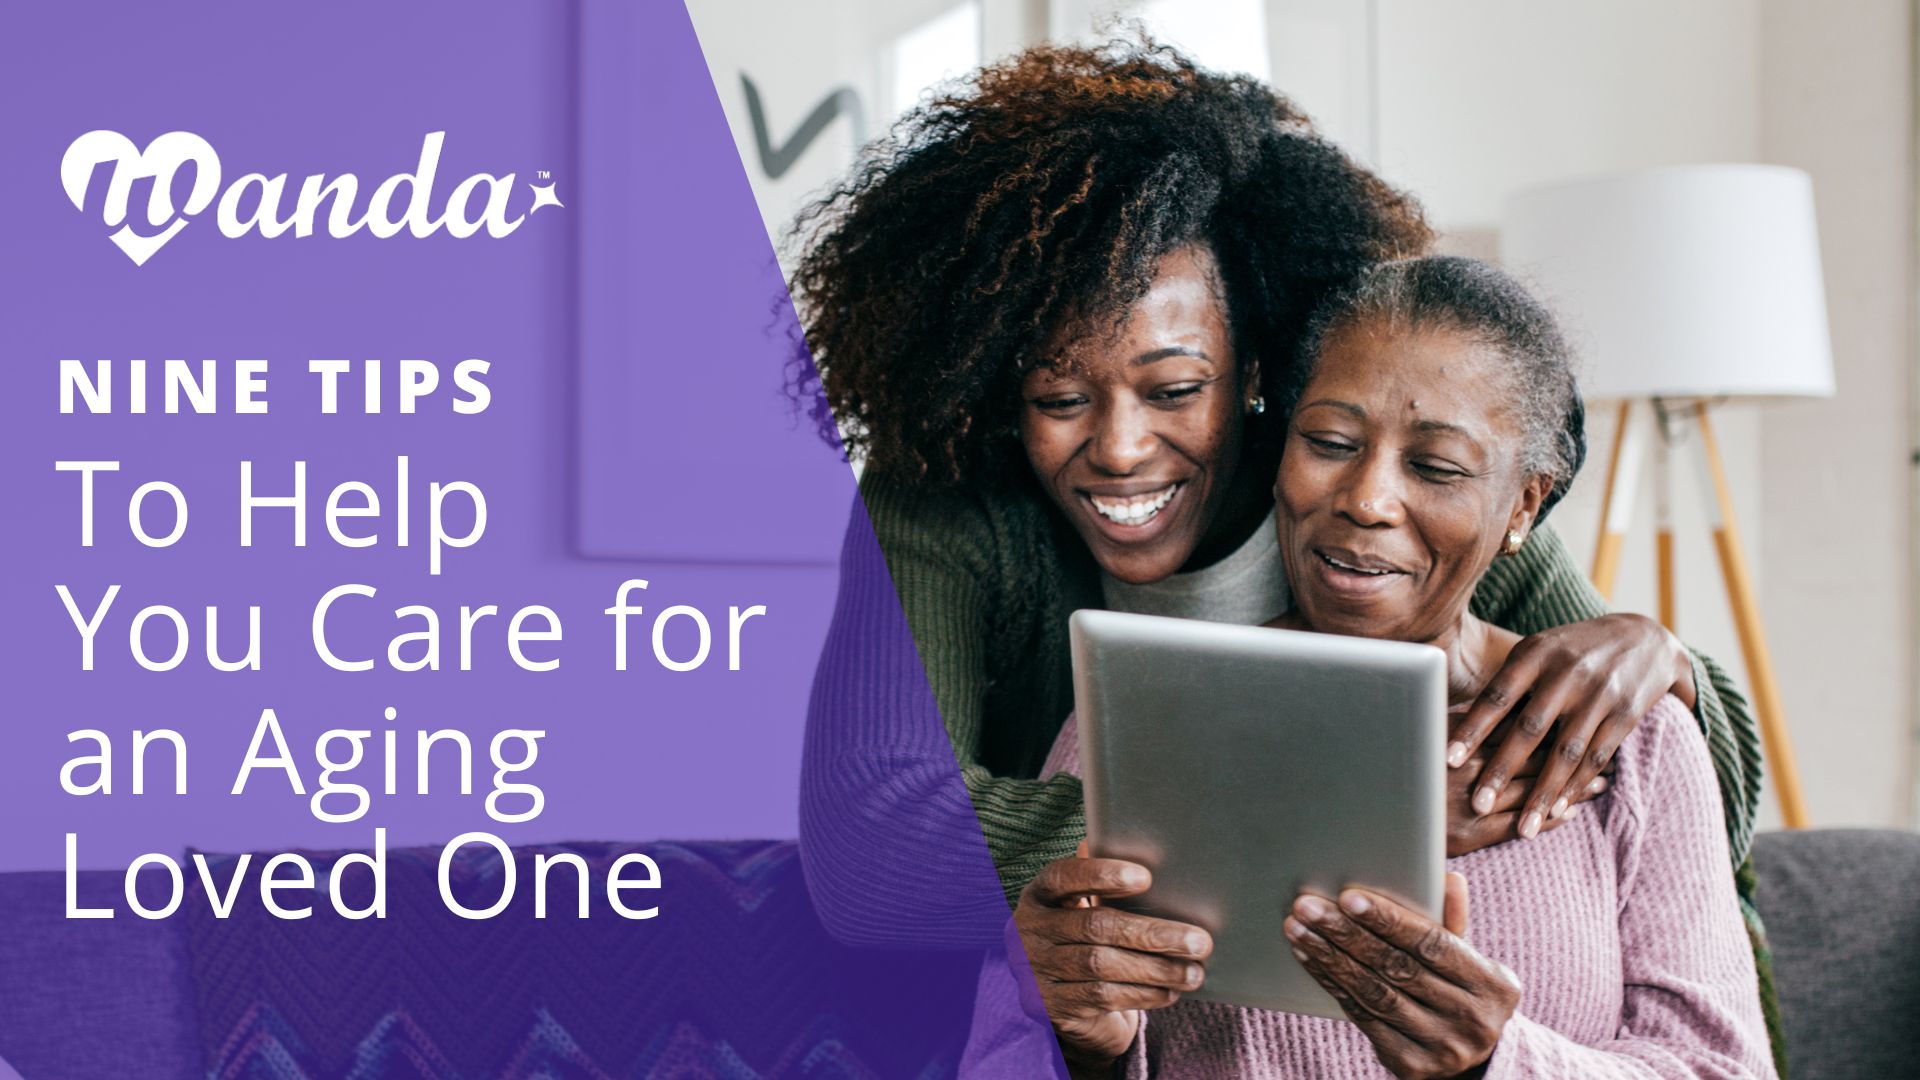 Are you caring for an aging loved one? Check out our tips and learn how Wanda can support you in your caregiving journey!